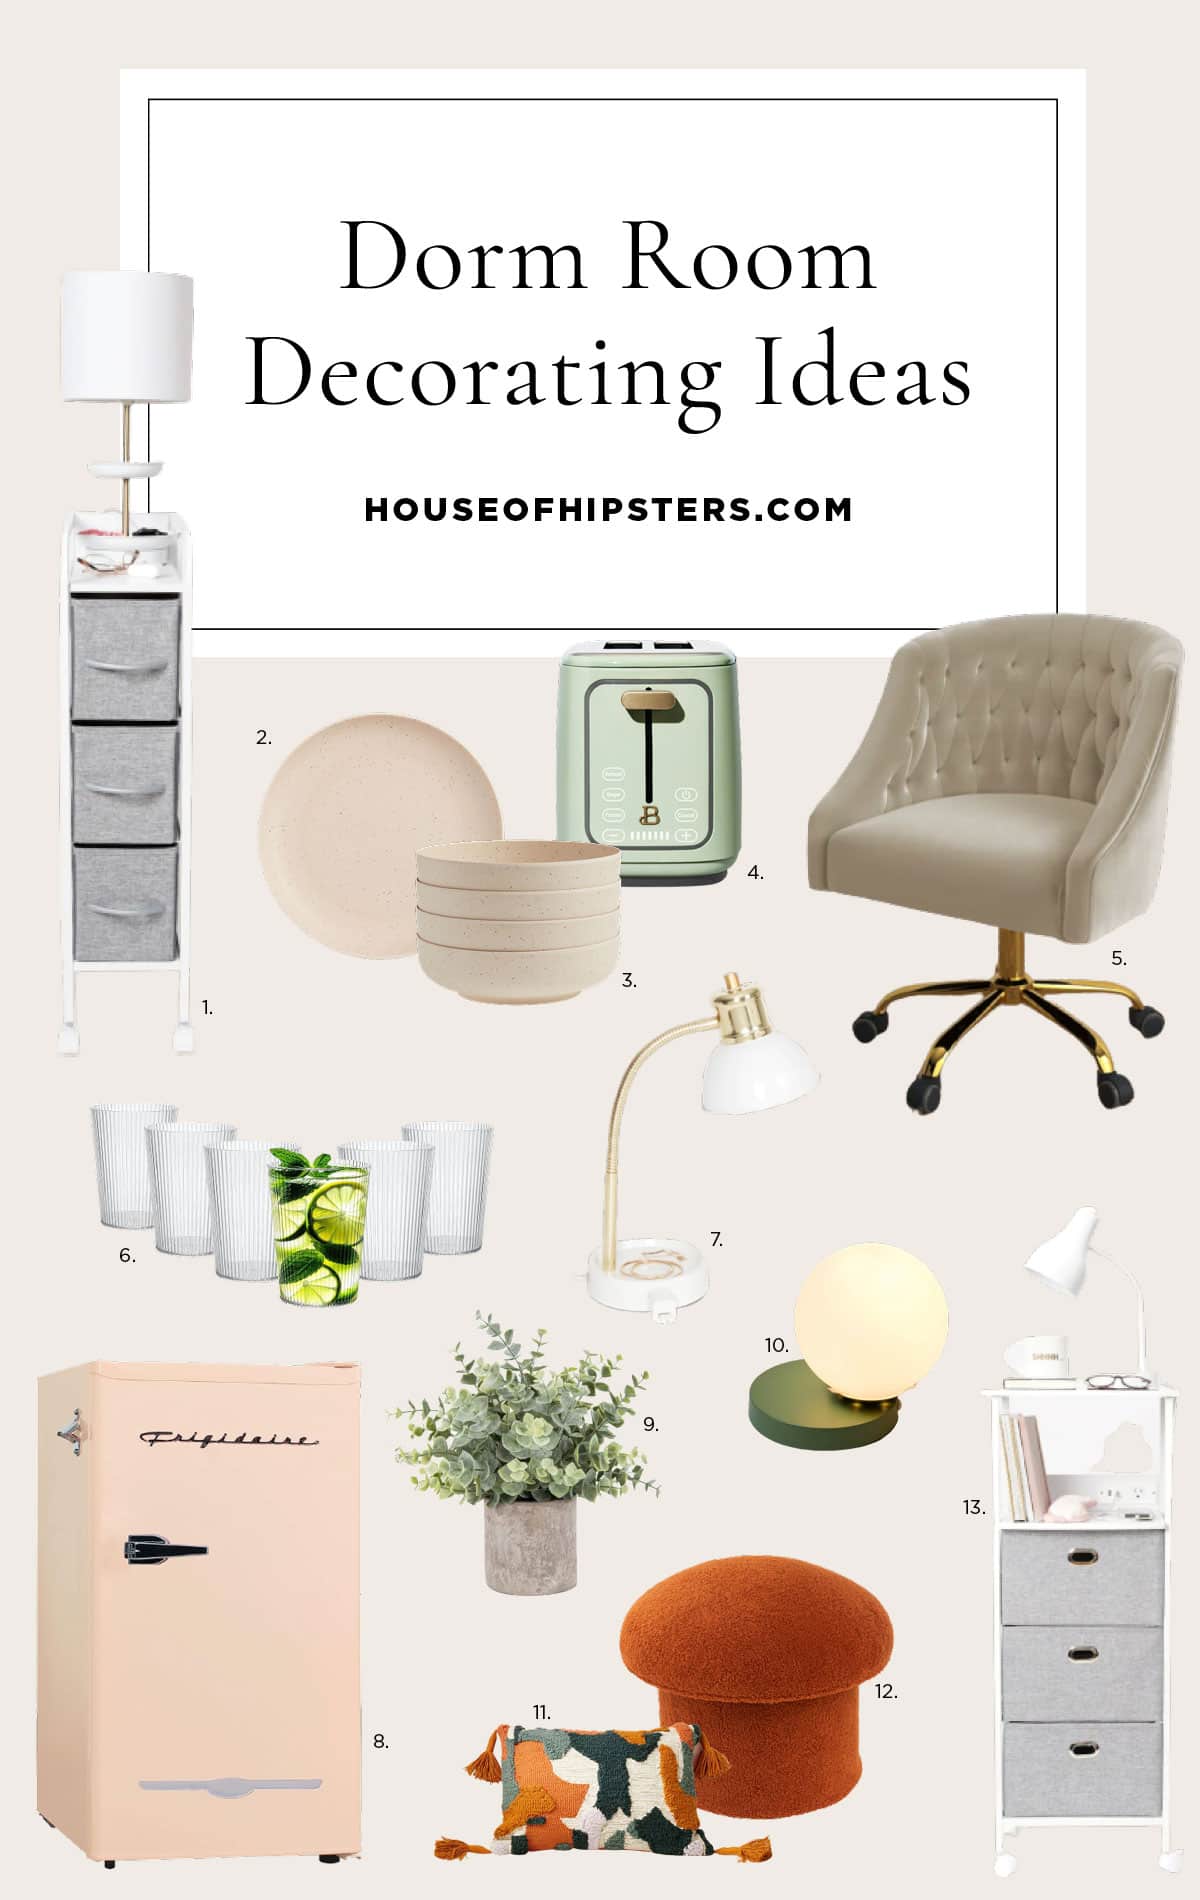 Dorm Room Decorating Ideas - Organization and Decor for College Life